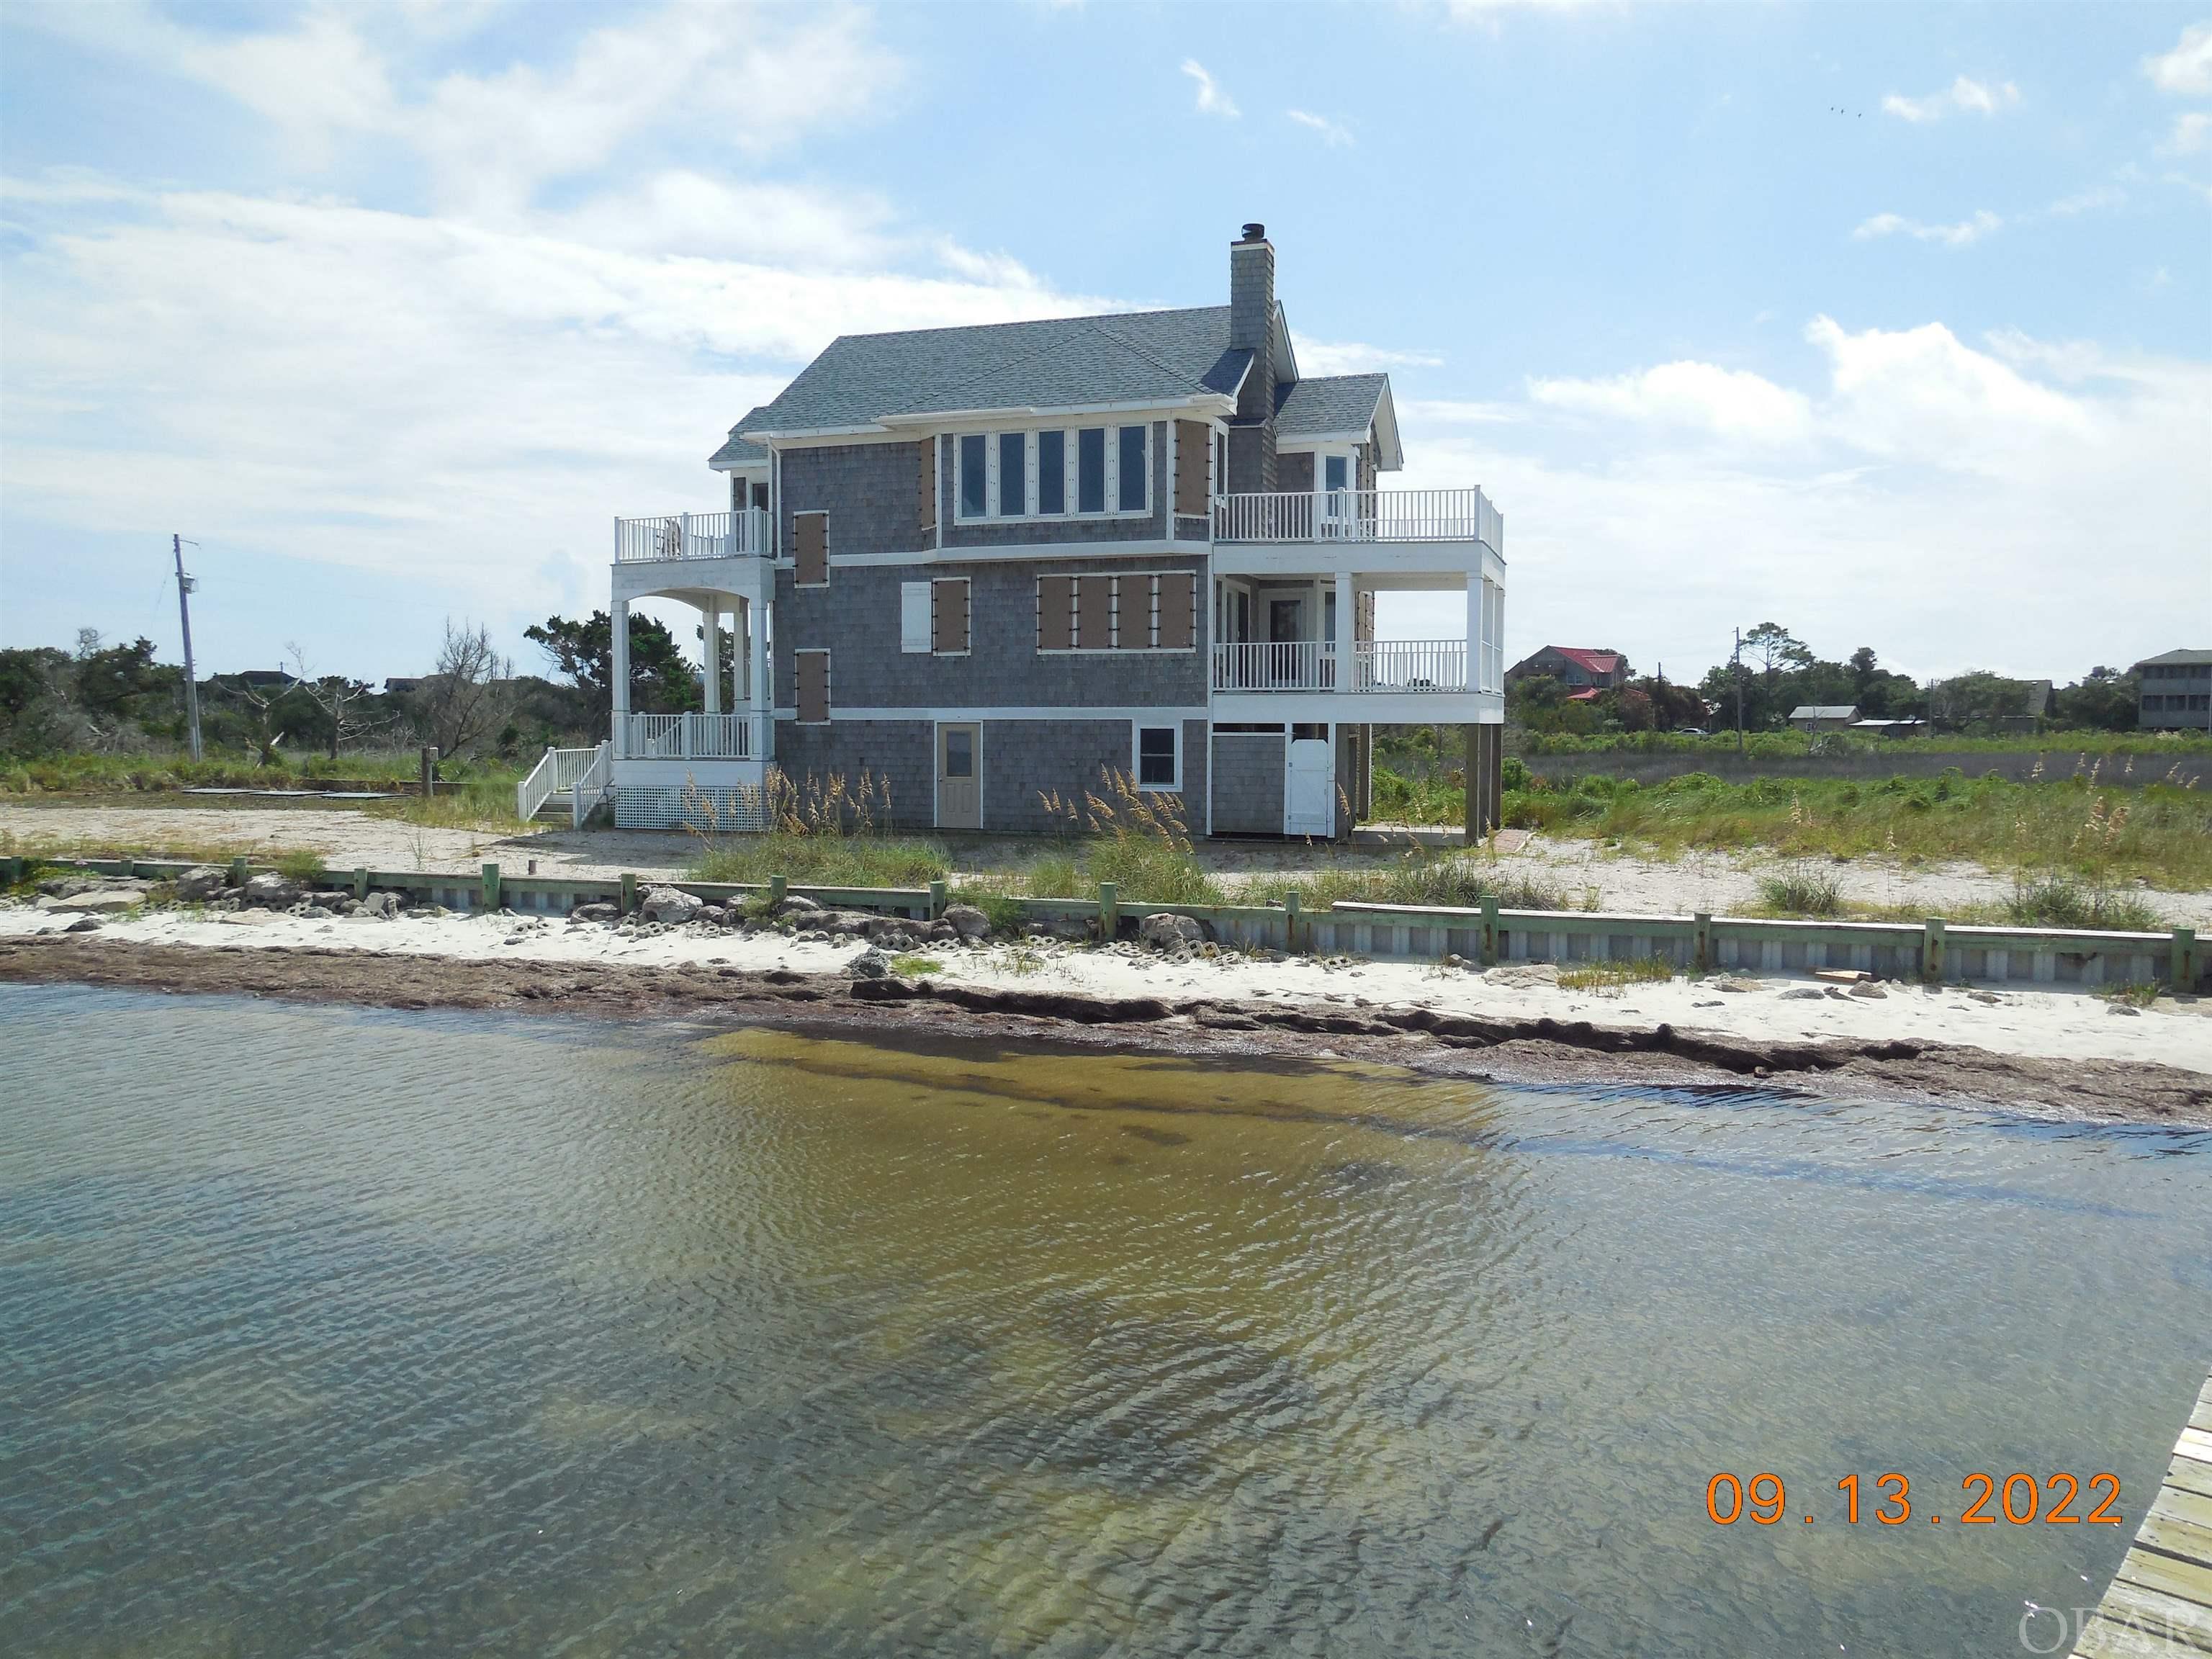 169 ONeal Drive, Ocracoke, NC 27960, 3 Bedrooms Bedrooms, ,3 BathroomsBathrooms,Residential,For sale,ONeal Drive,120327